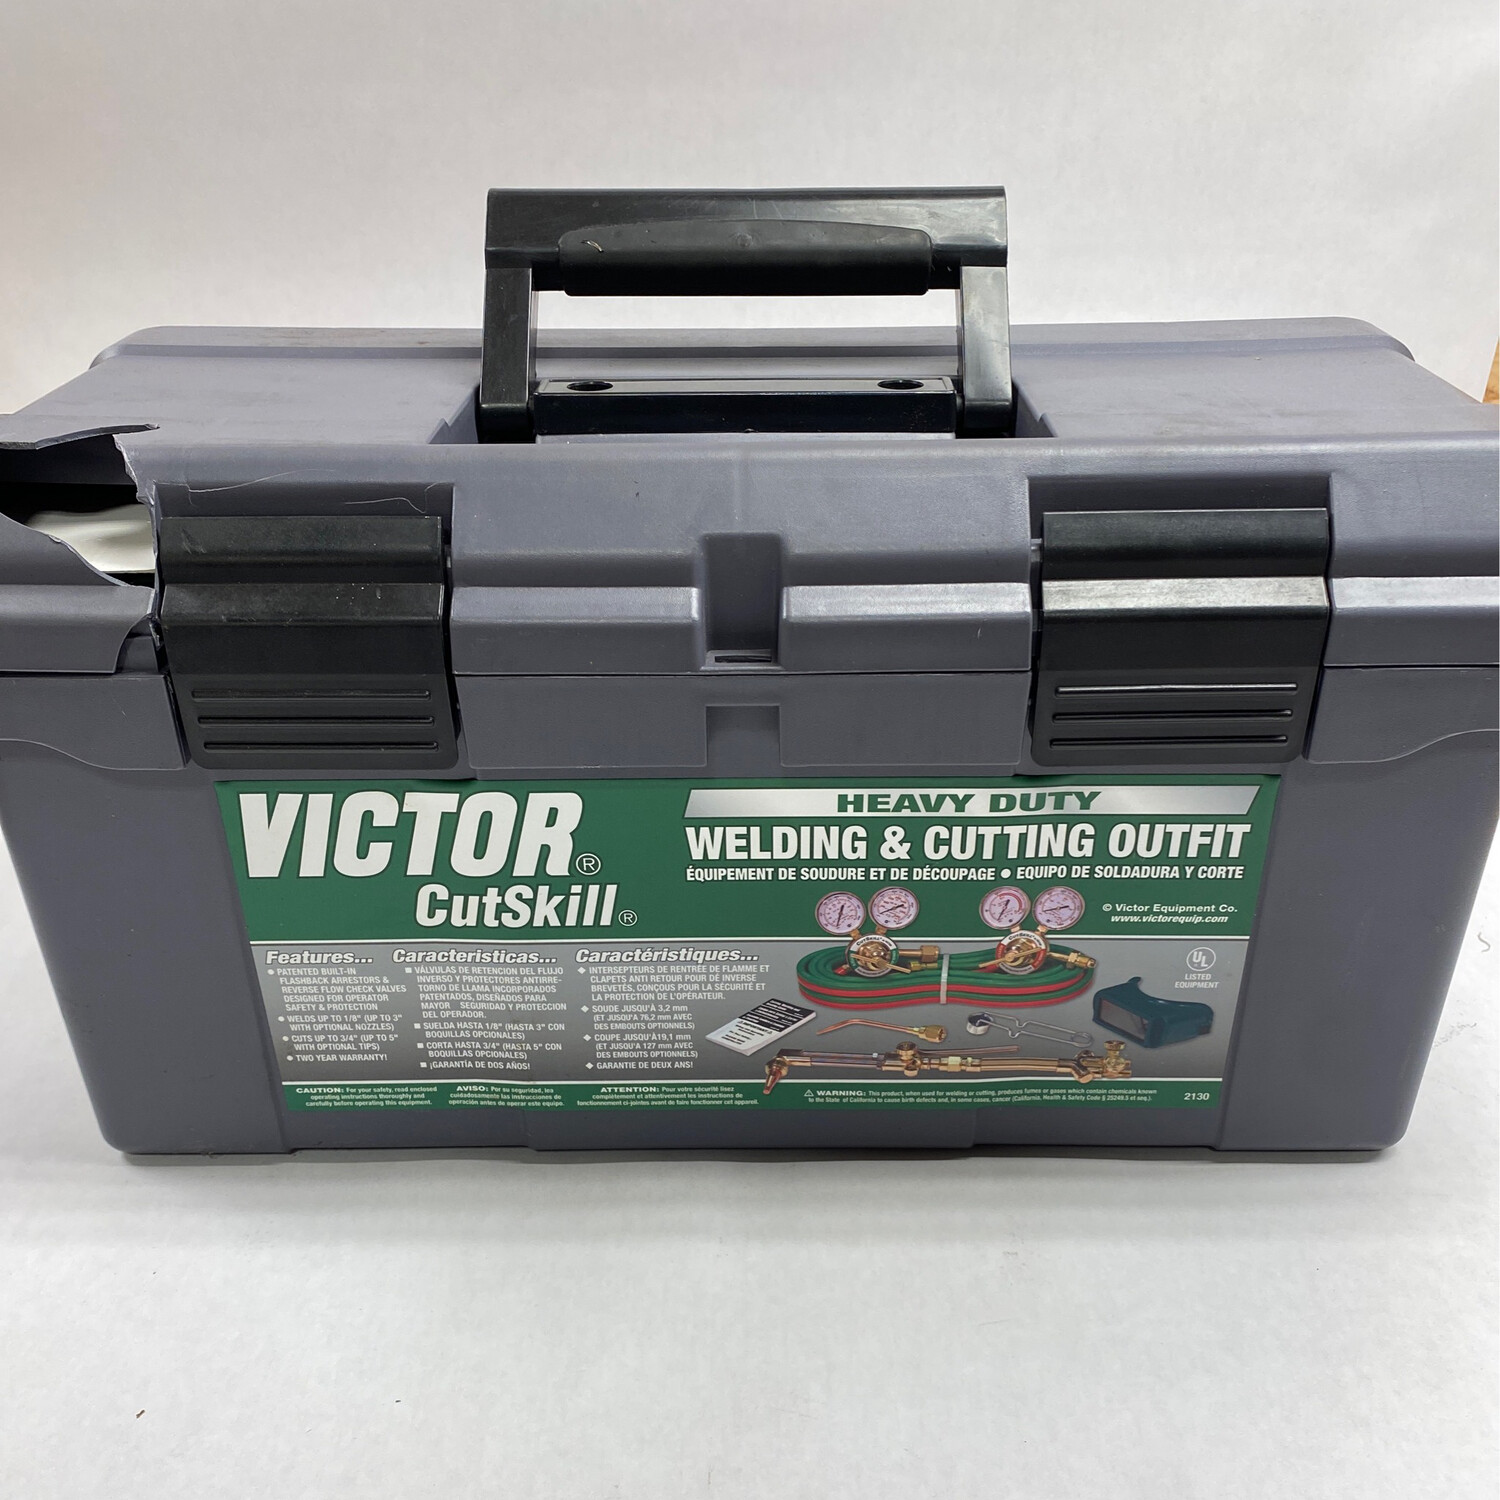 Victor CutSkill Welding & Cutting Outfit, 2131